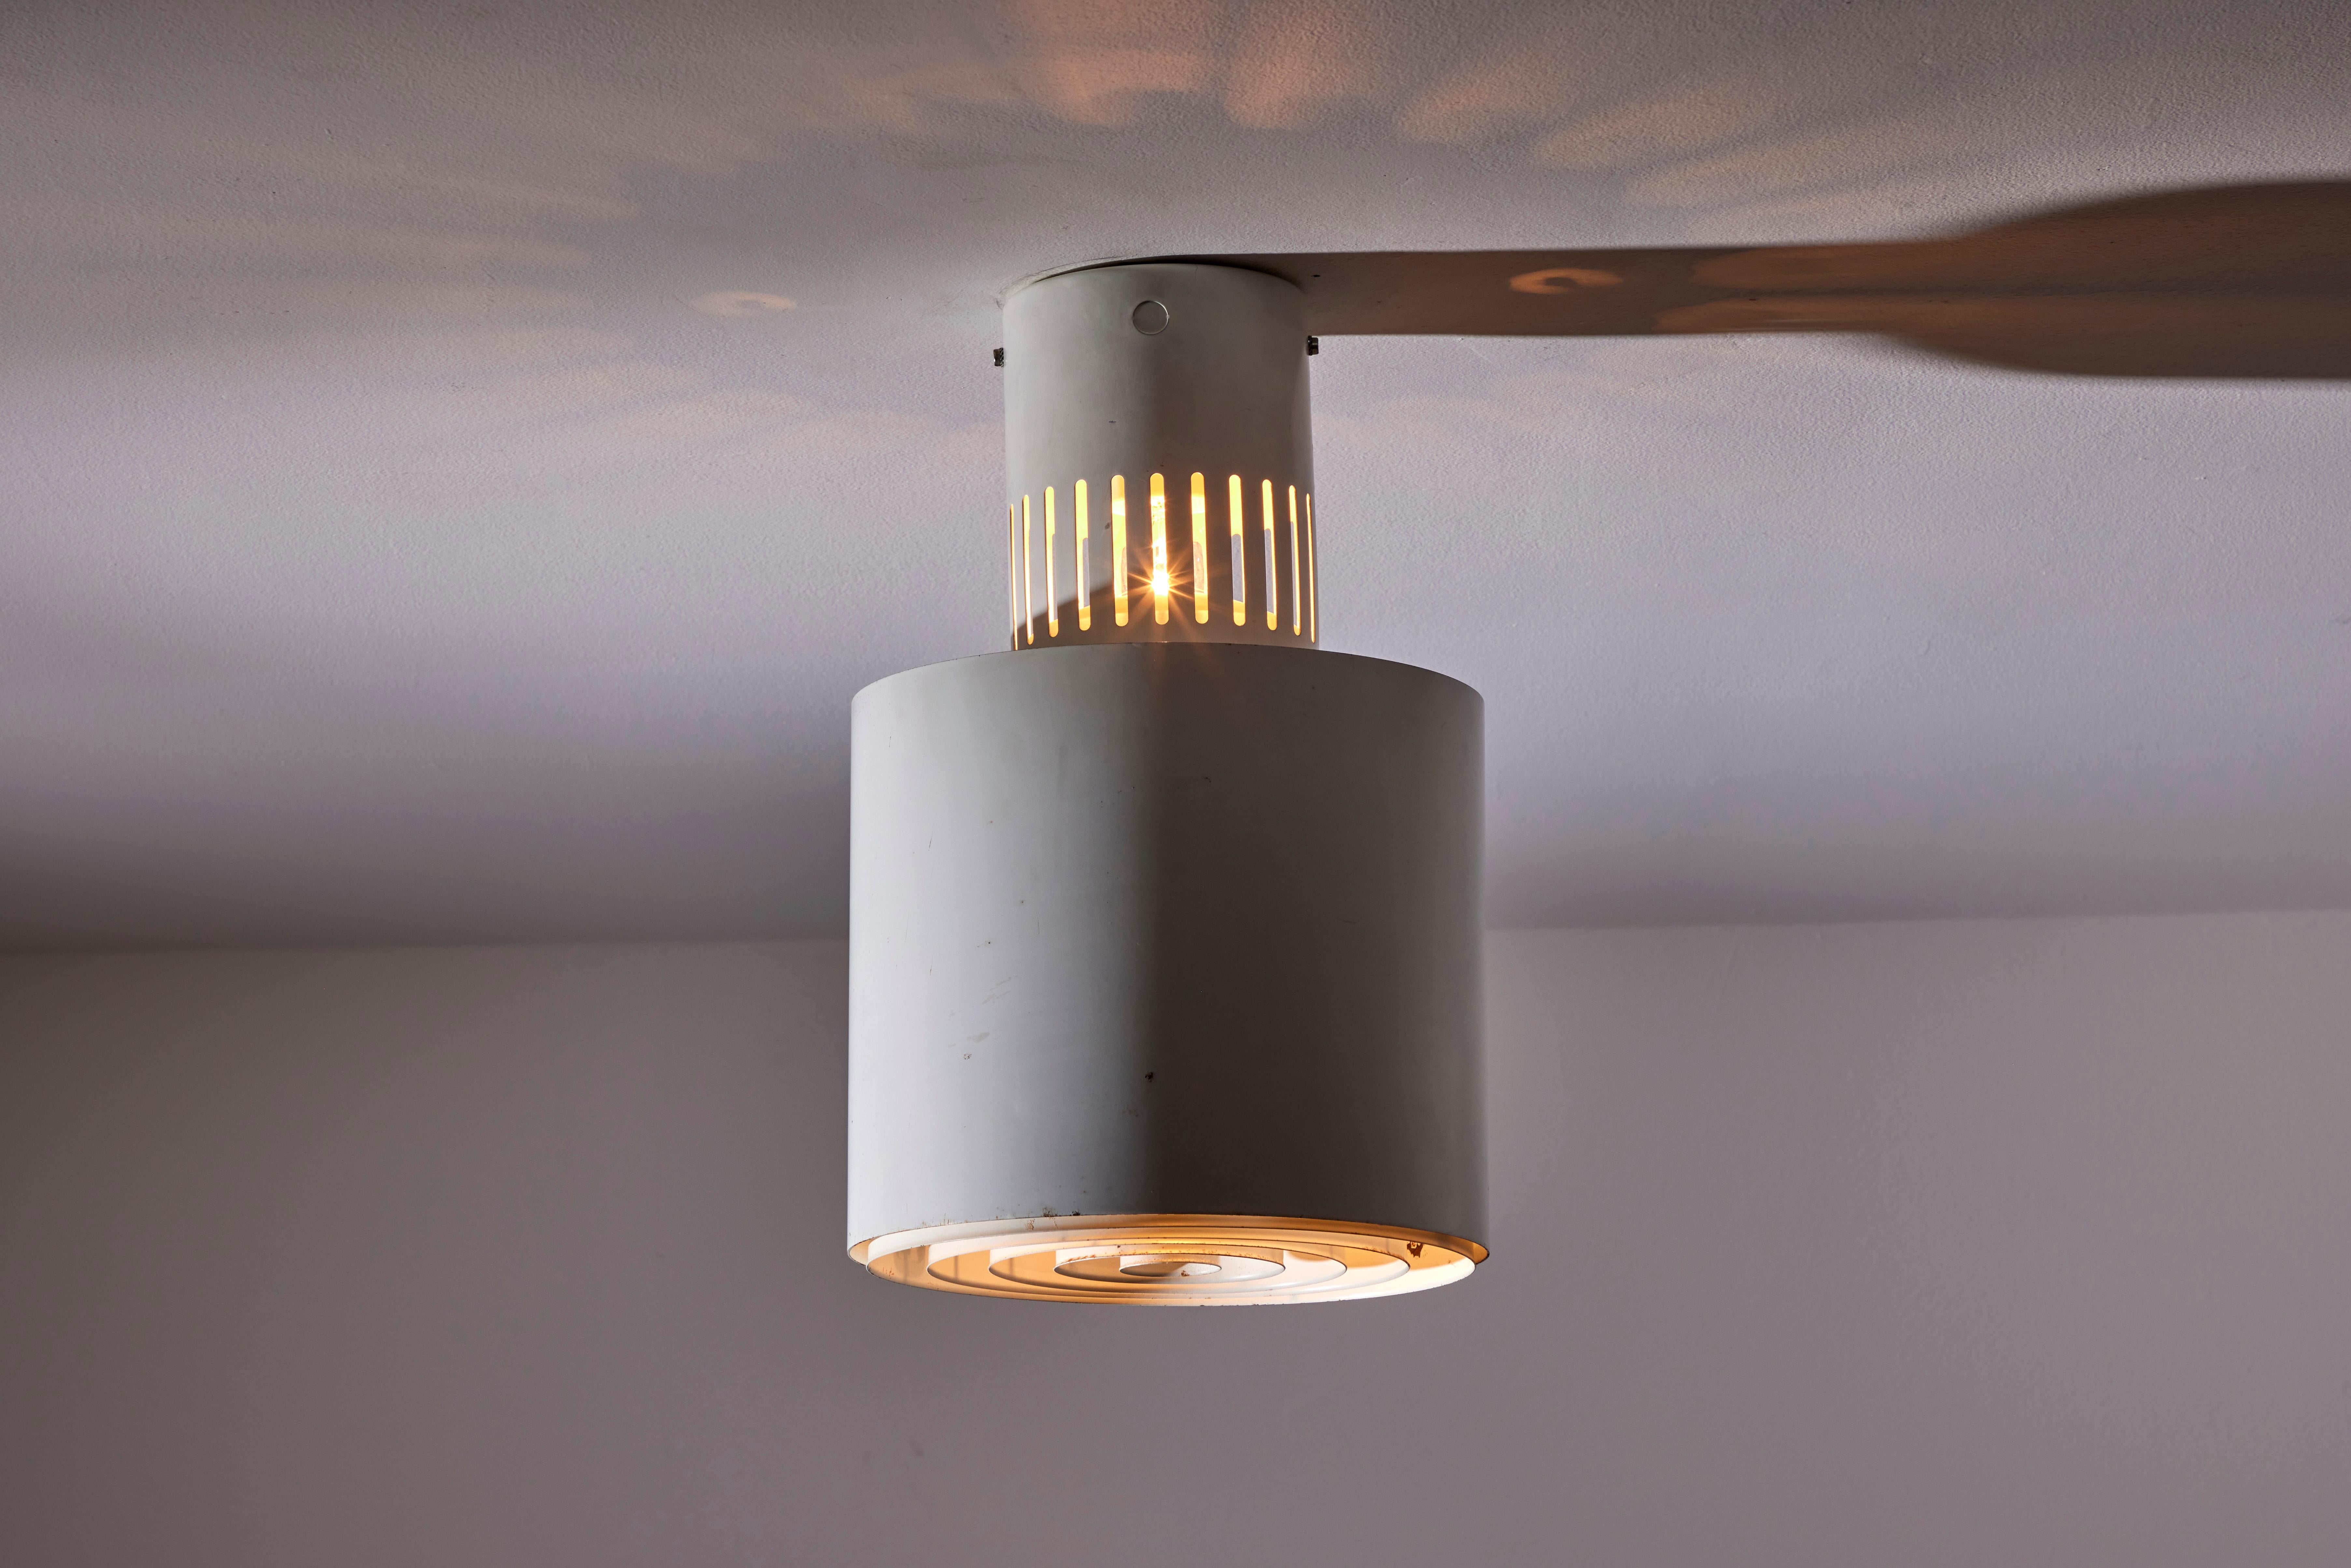 Painted Flush Mount Ceiling Lights by Lisa Johansson-Pape